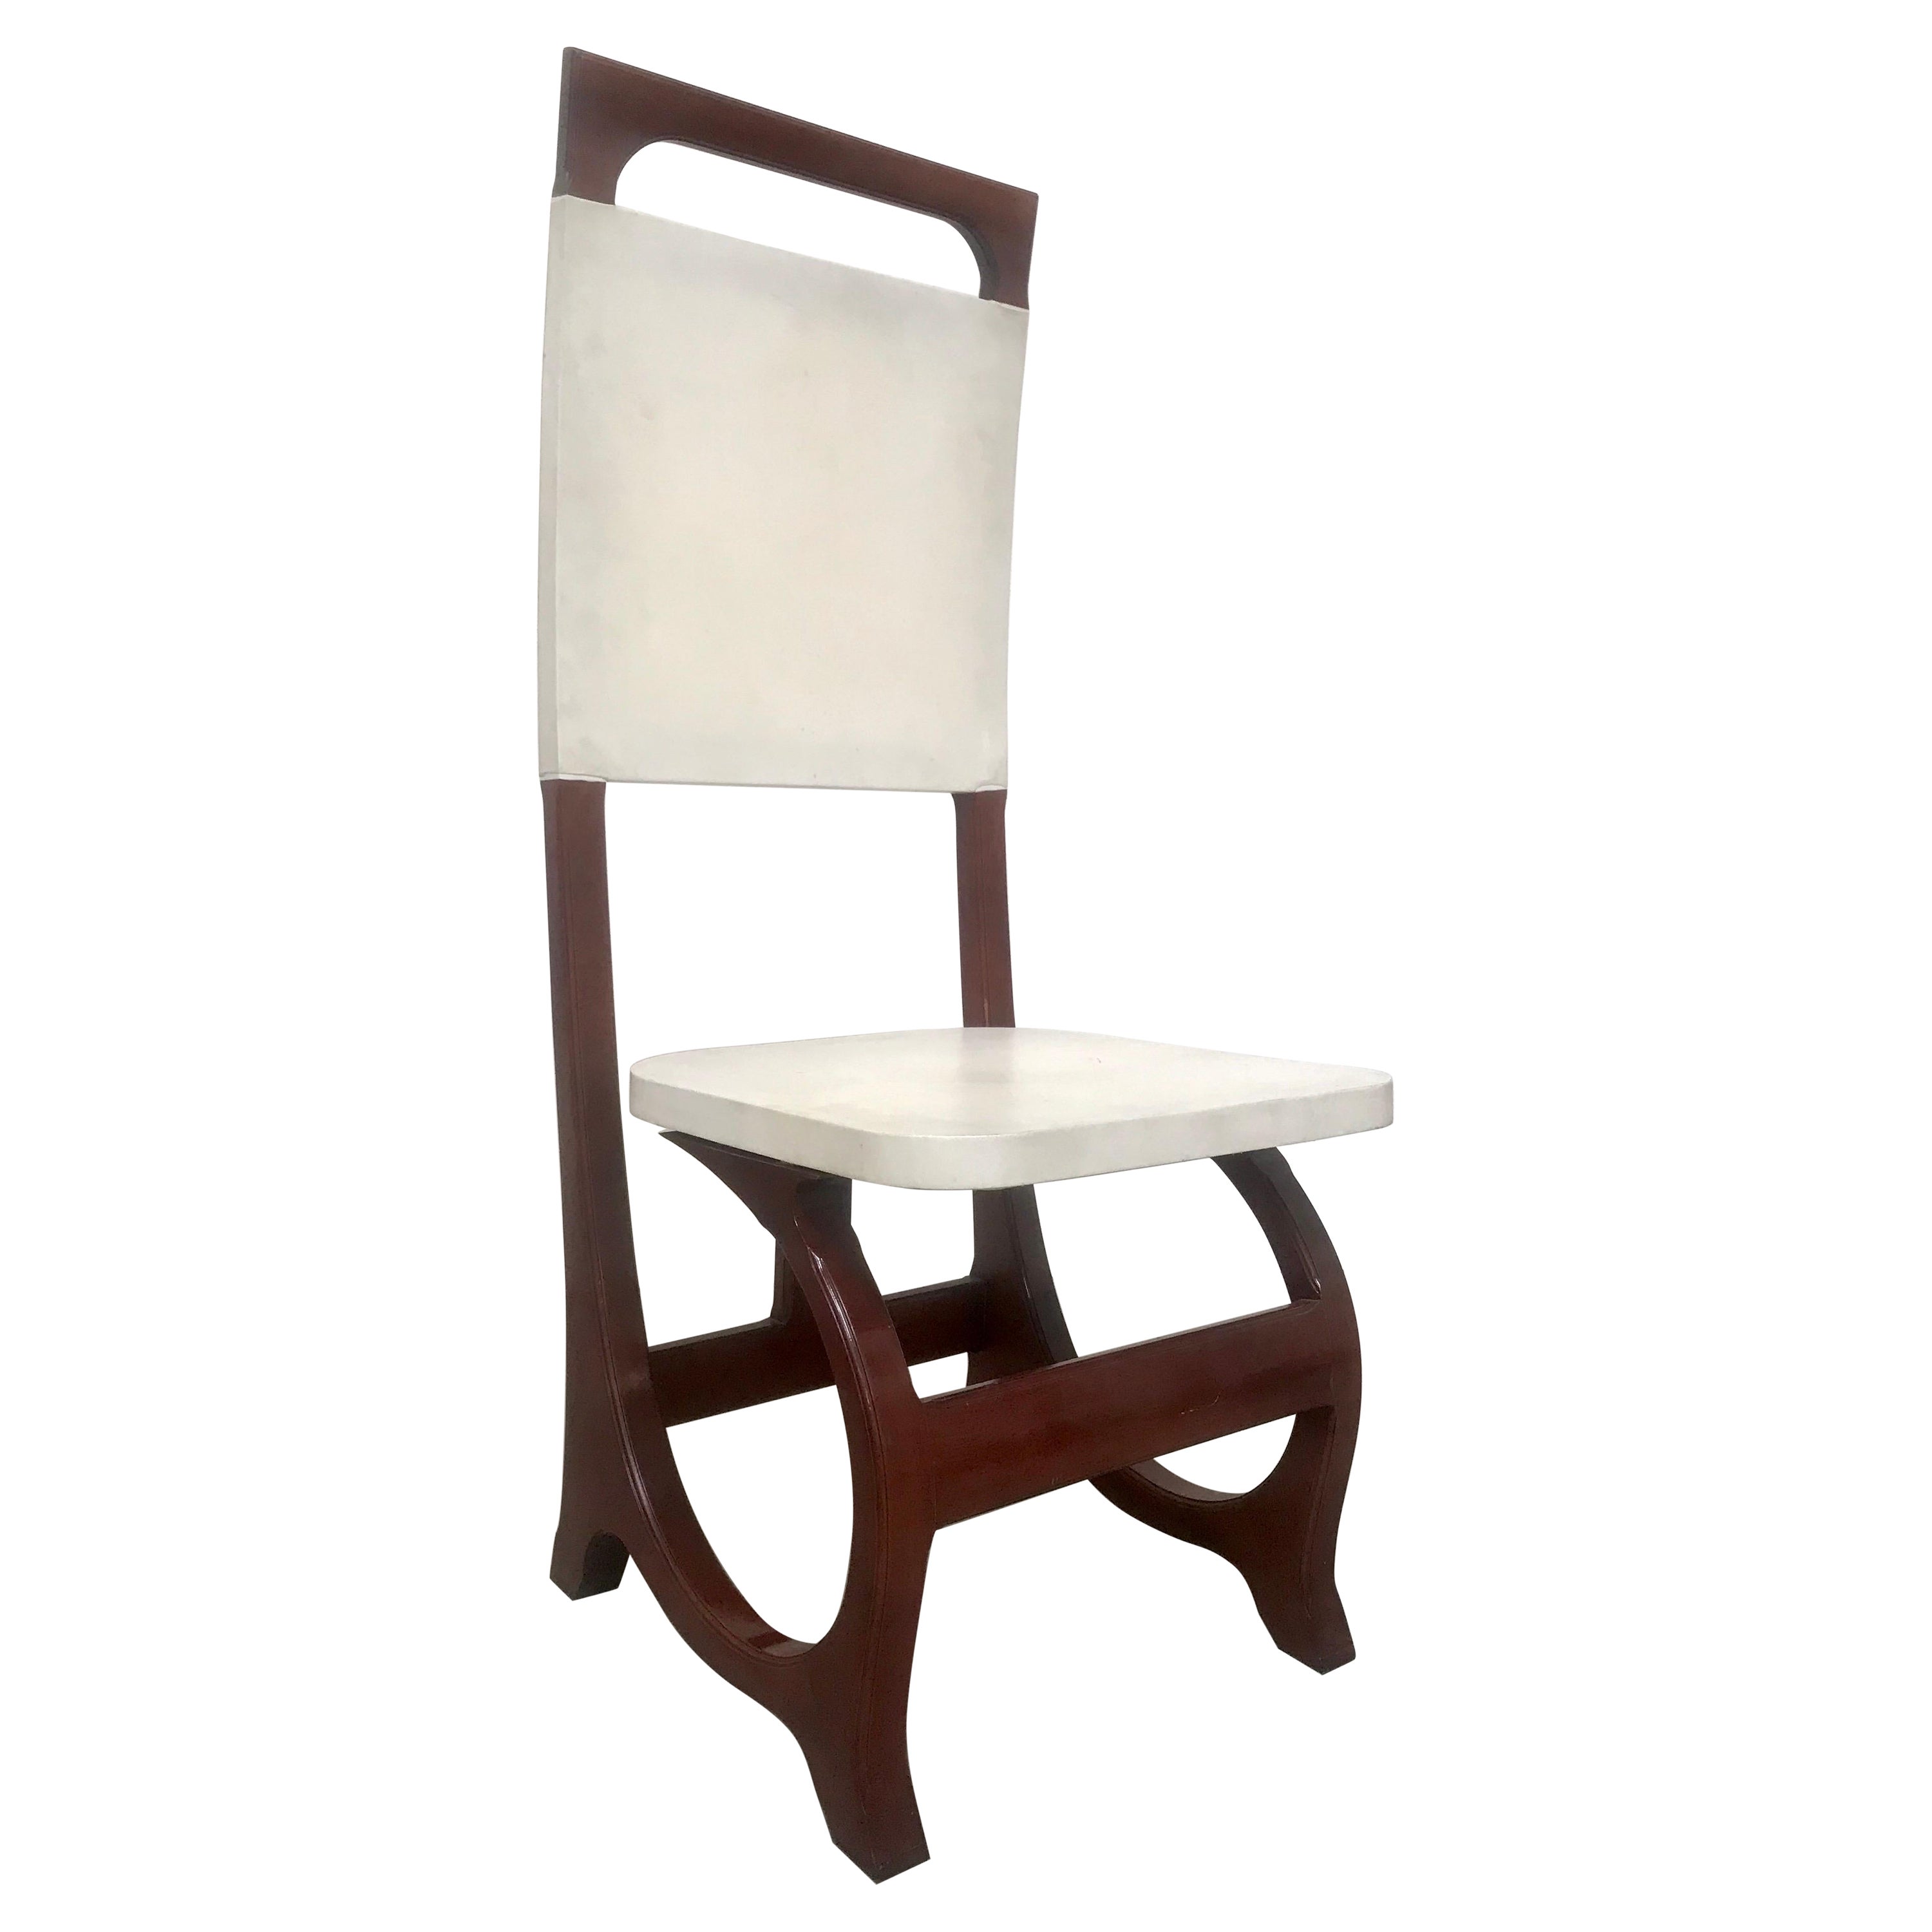 Rosewood + Parchment Accent Chair in-the-style Carlo Bugatti